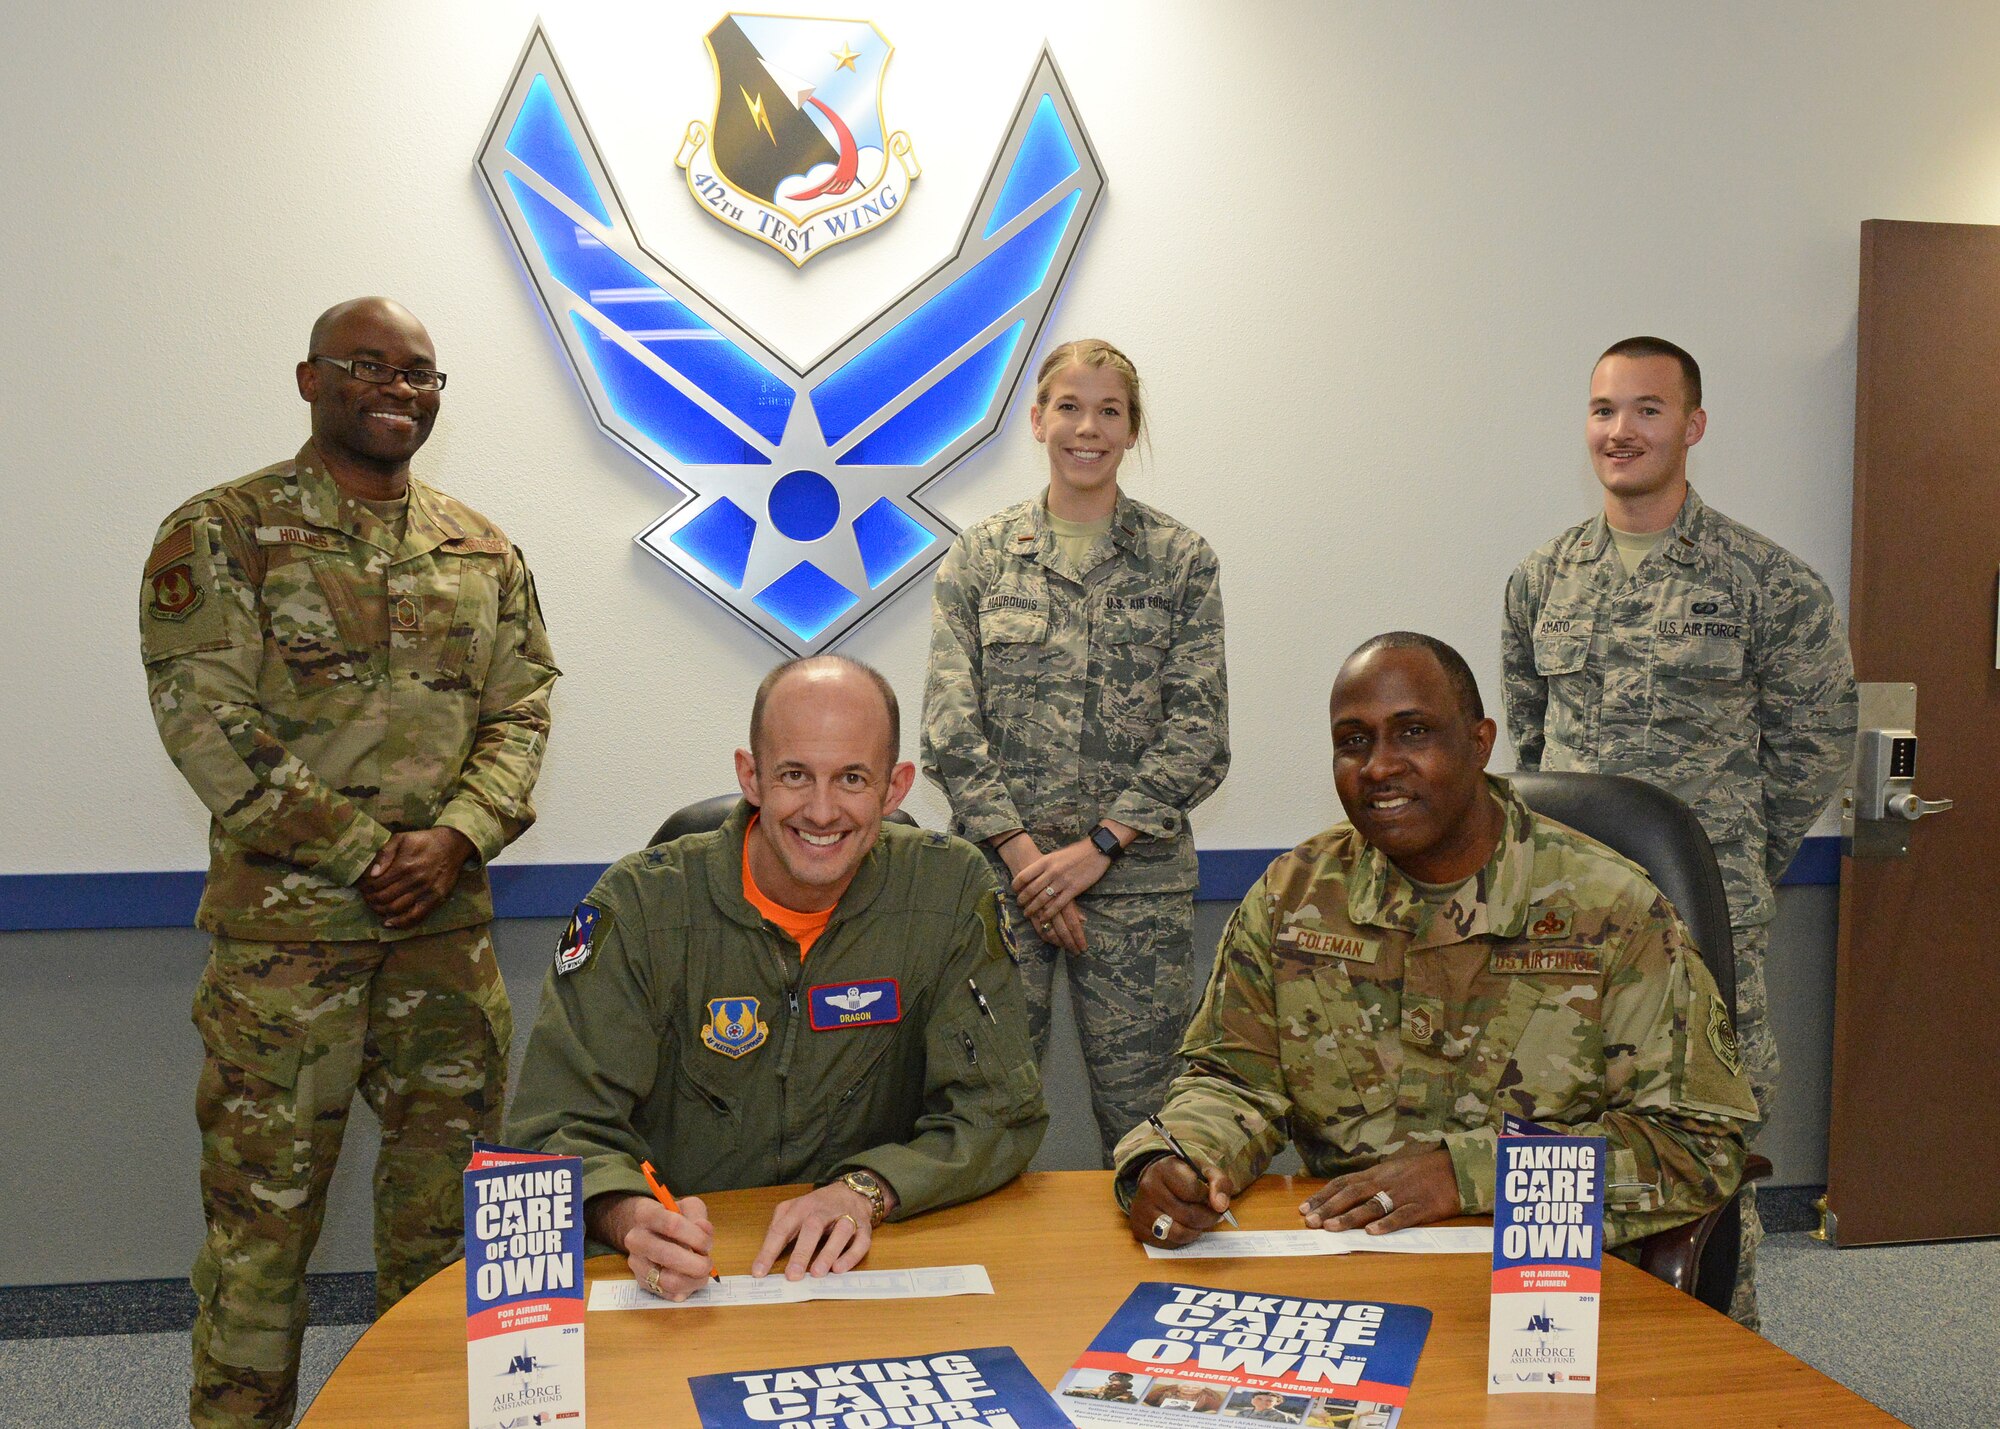 Brig. Gen. E. John Teichert, 412th Test Wing commander, and Chief Master Sgt. James Coleman, 412th TW acting command chief, pose for a photo while filling out their Air Force Assistance Fund donation forms March 22. Standing in the back, from left to right are this year's AFAF managers: Senior Master Sgt. Brian Holmes, 2nd Lt. Morgan Mavroudis and 2nd Lt. Evan Amato. (U.S. Air Force photo by Kenji Thuloweit)